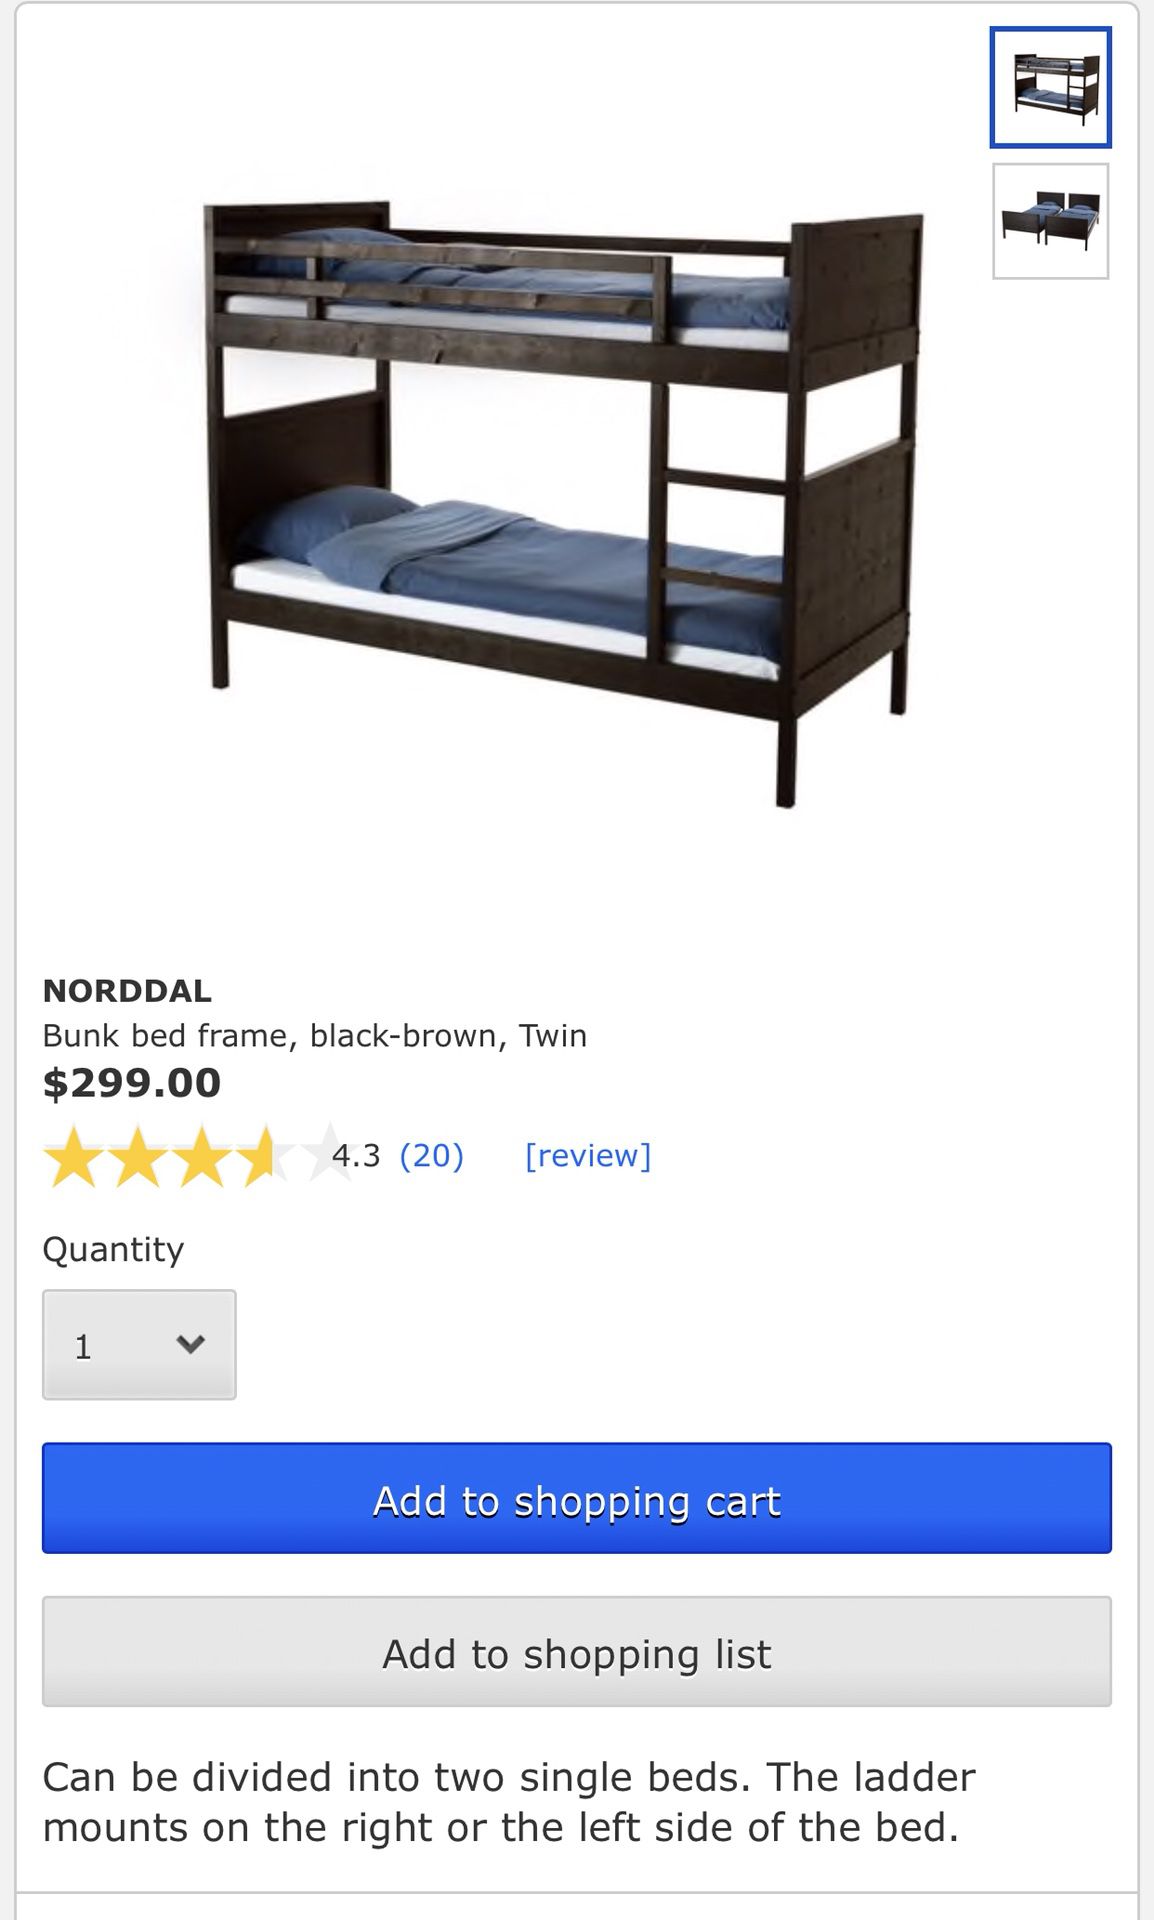 Ikea Norddal Bunk Bed For In, Ikea Norddal Bunk Bed Review